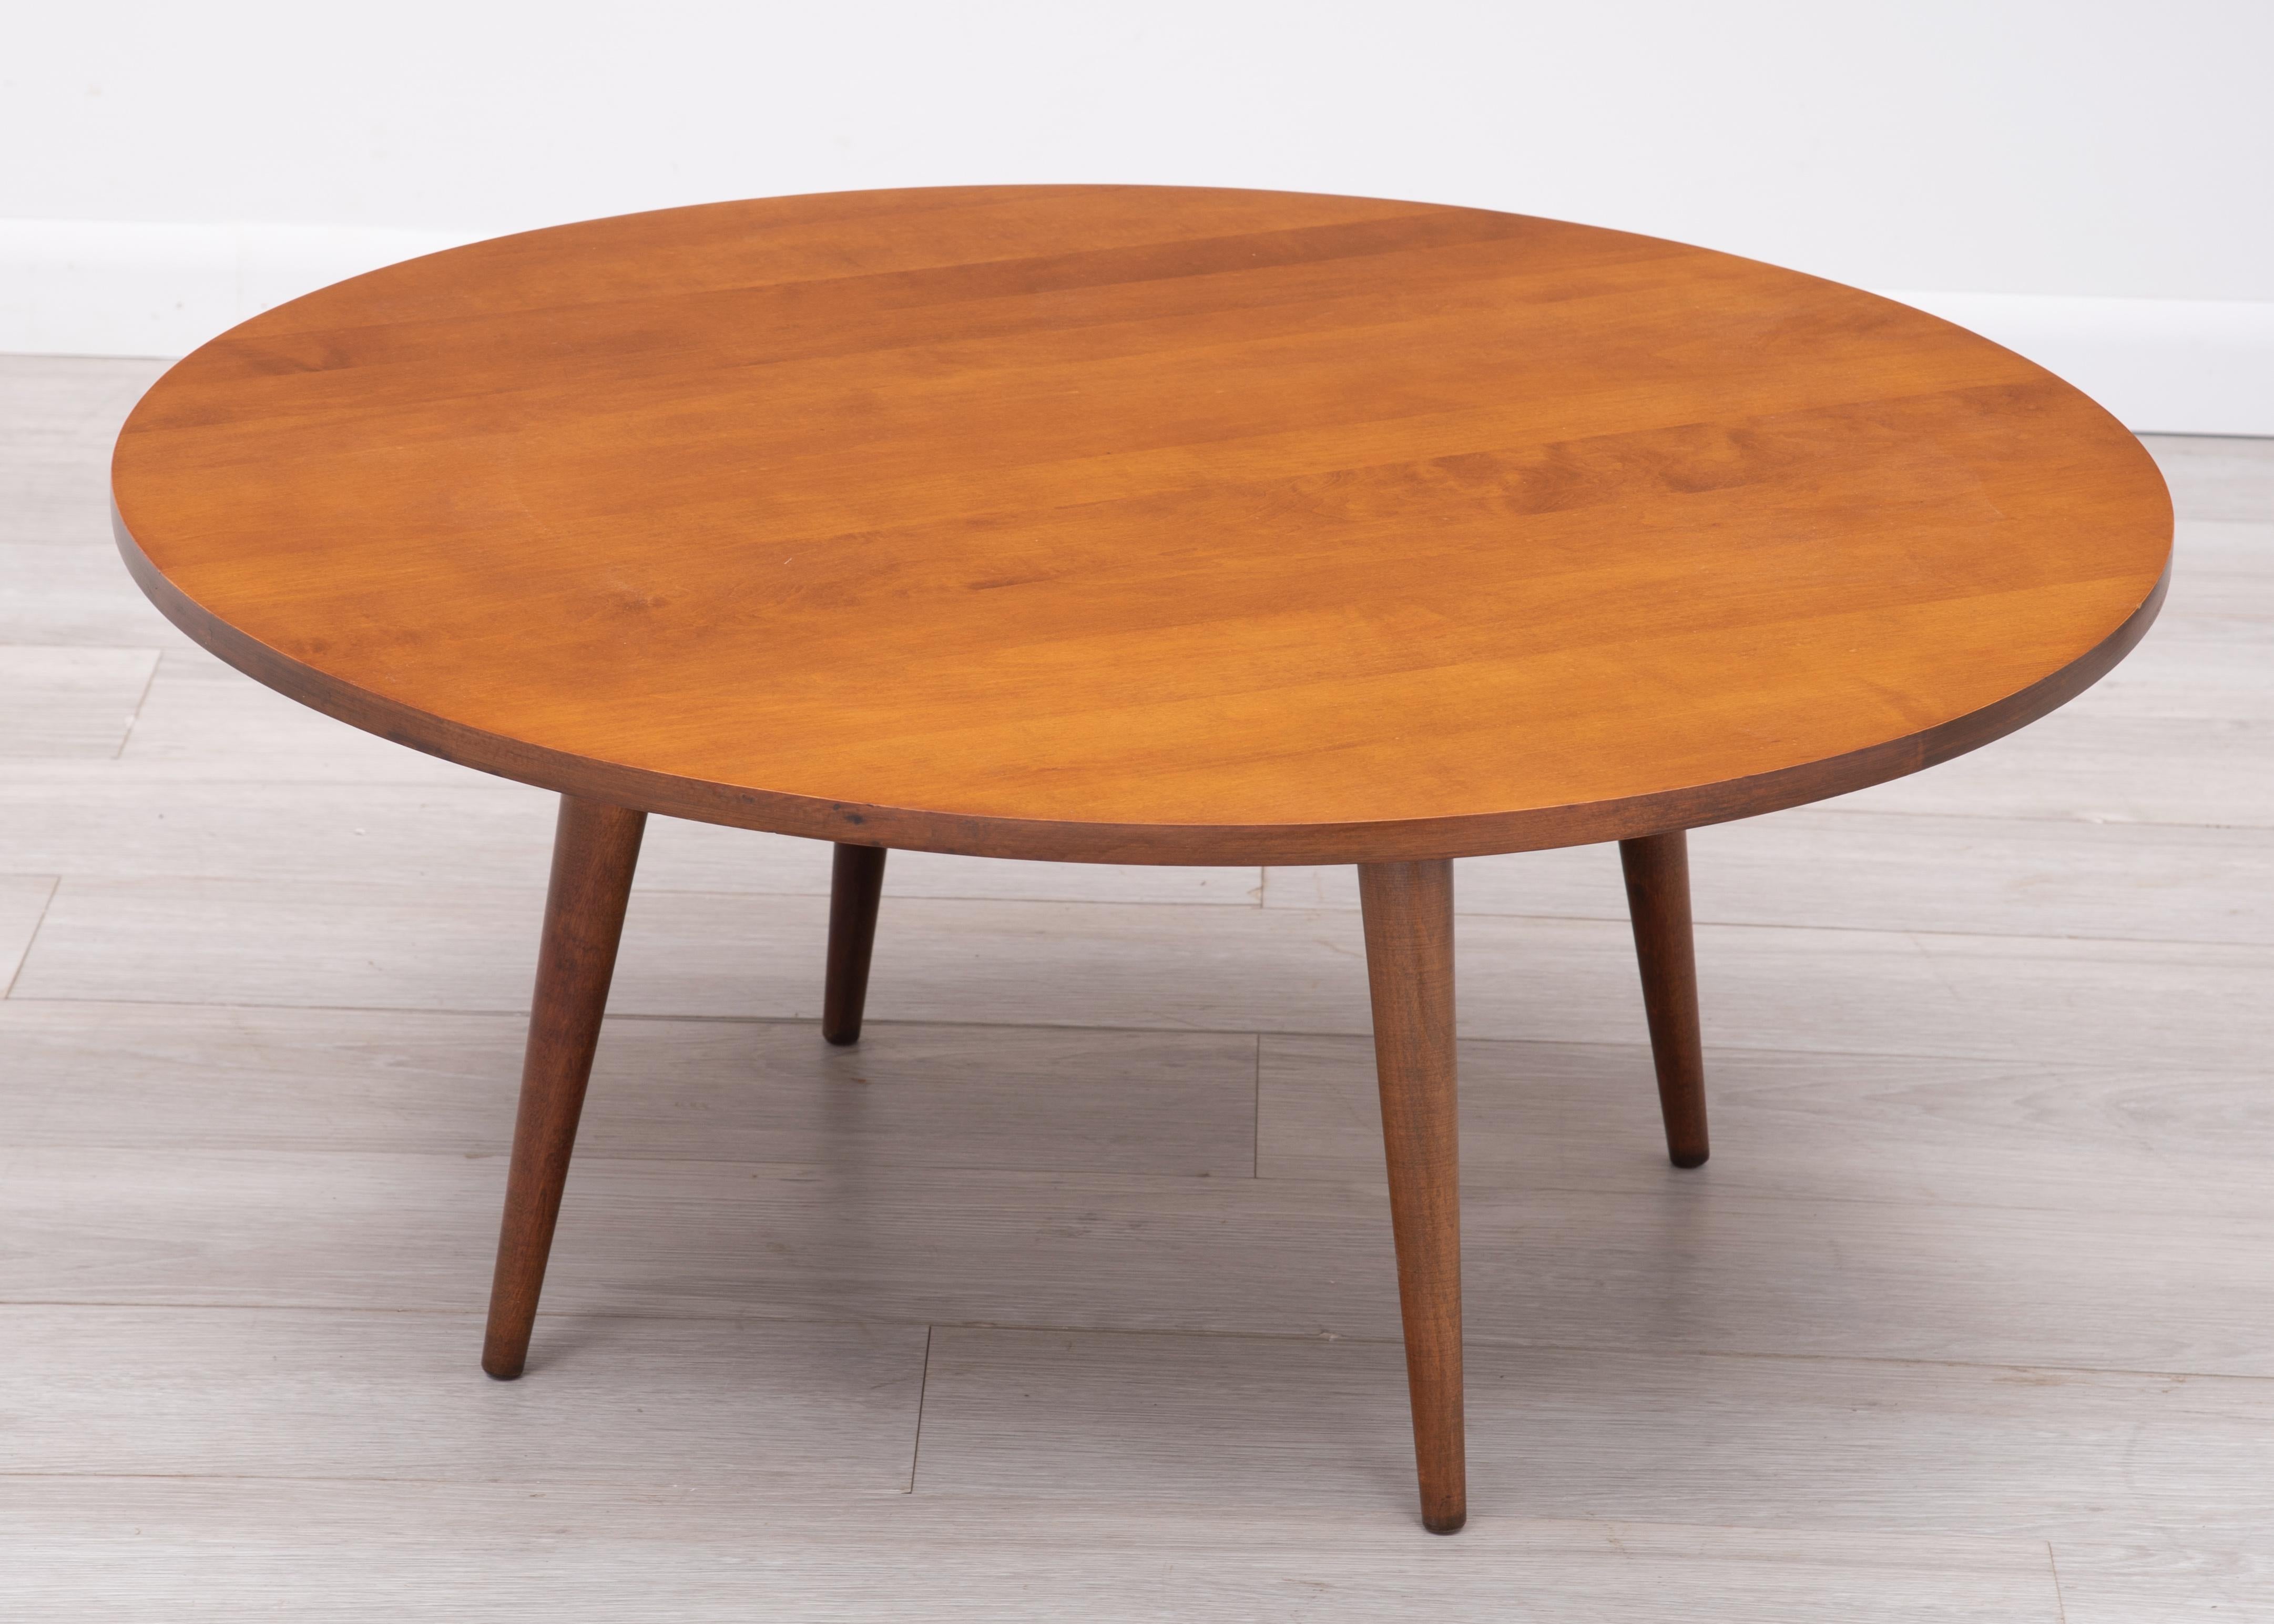 Round Paul McCobb Planner Group Coffee Table Winchendon Unmarked 1950s For Sale 1